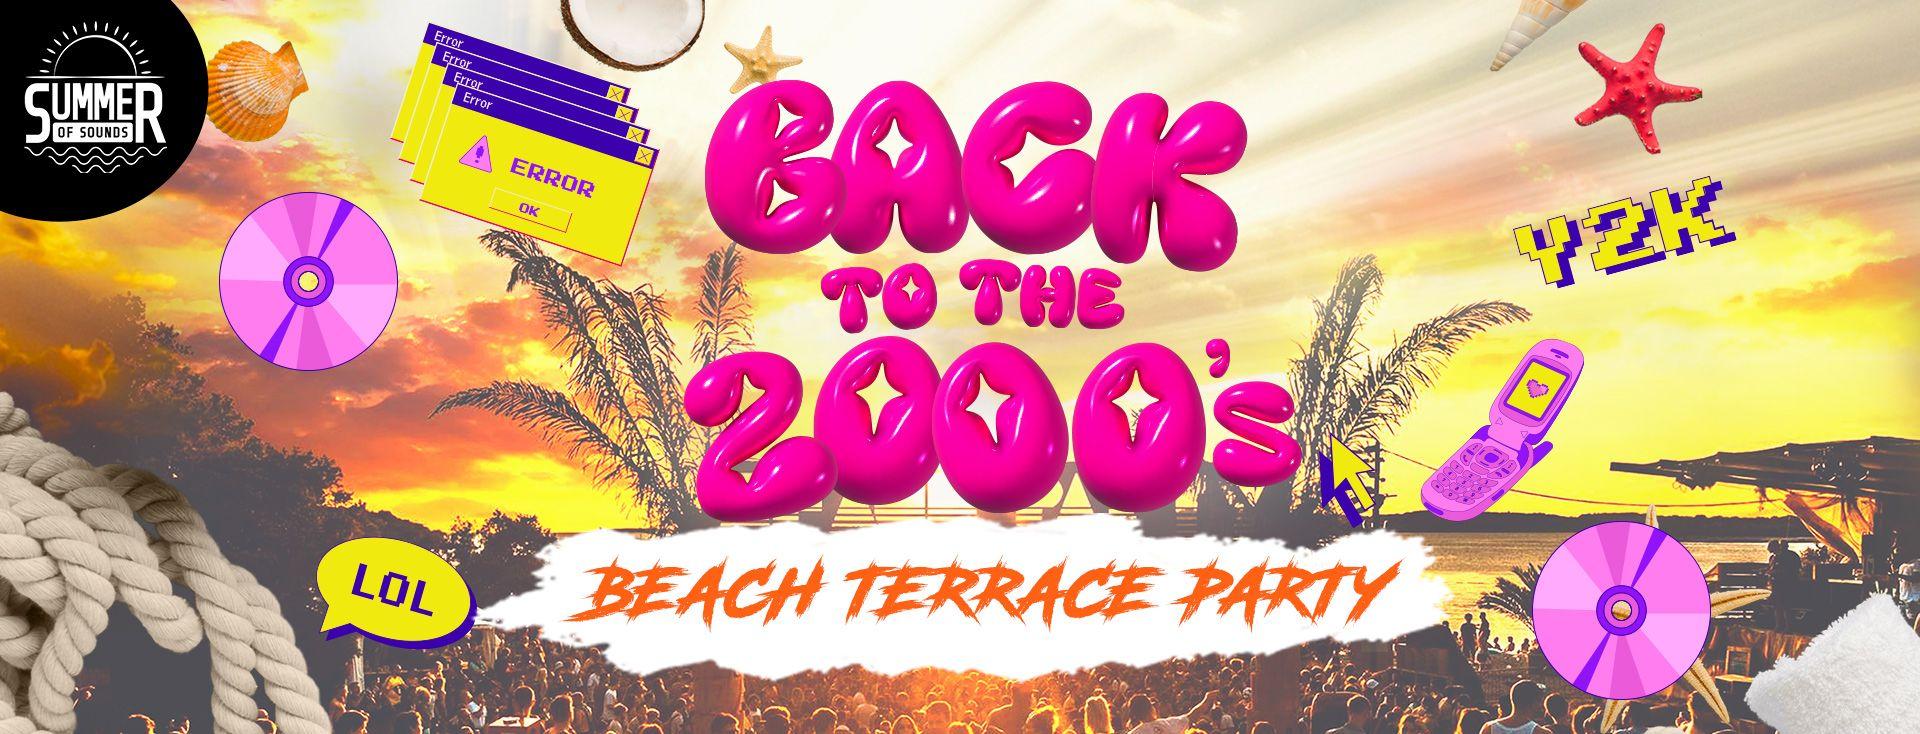 Back To The 2000's Beach Summer Terrace Party - Brighton